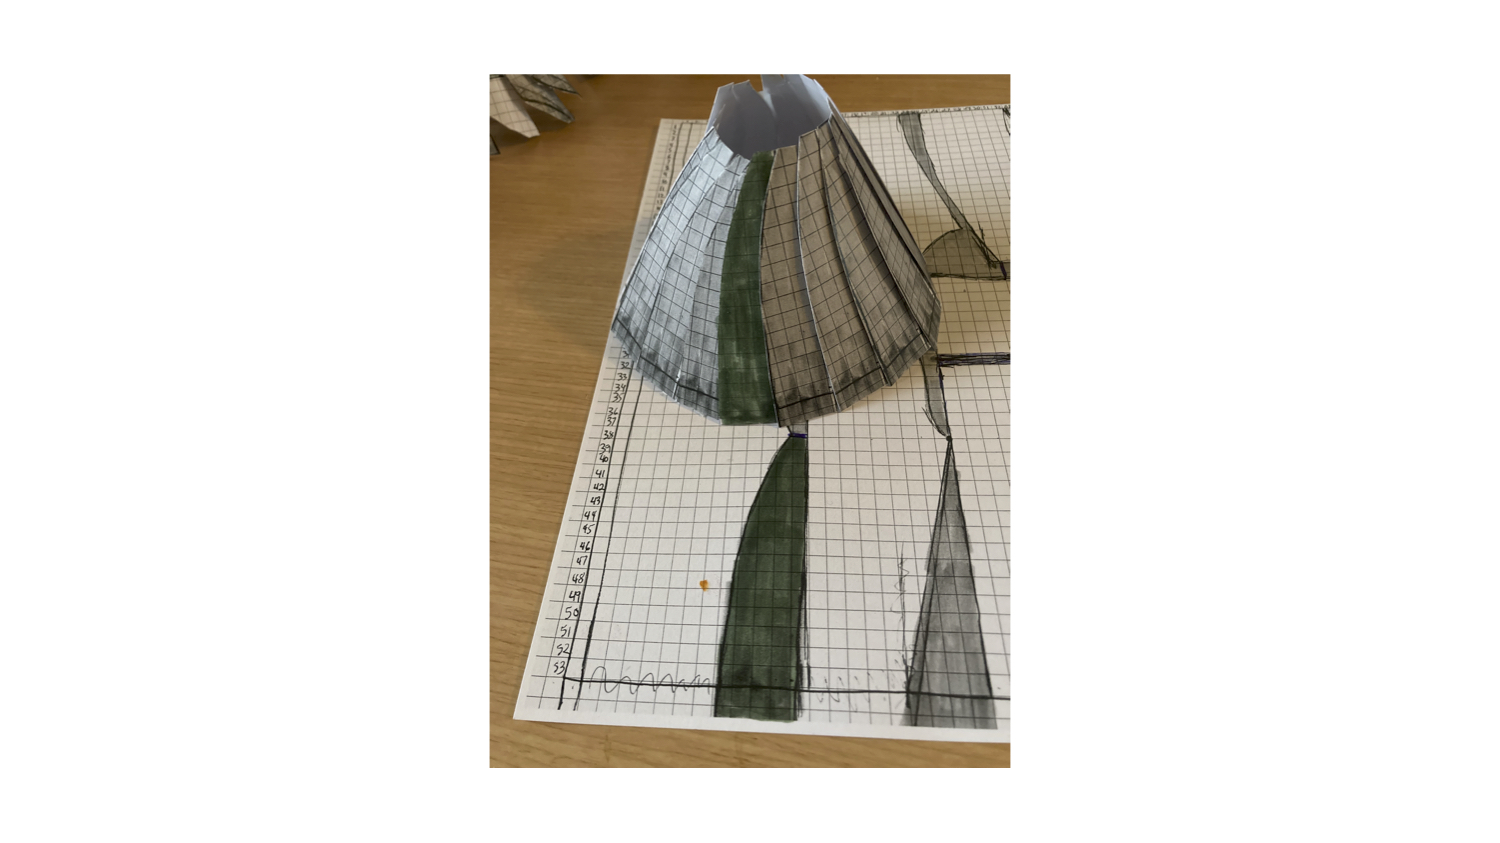 This is a block pattern waste shape turned into a skirt with out altering the found shape.  The size can be determined by using as many pieces as needed.